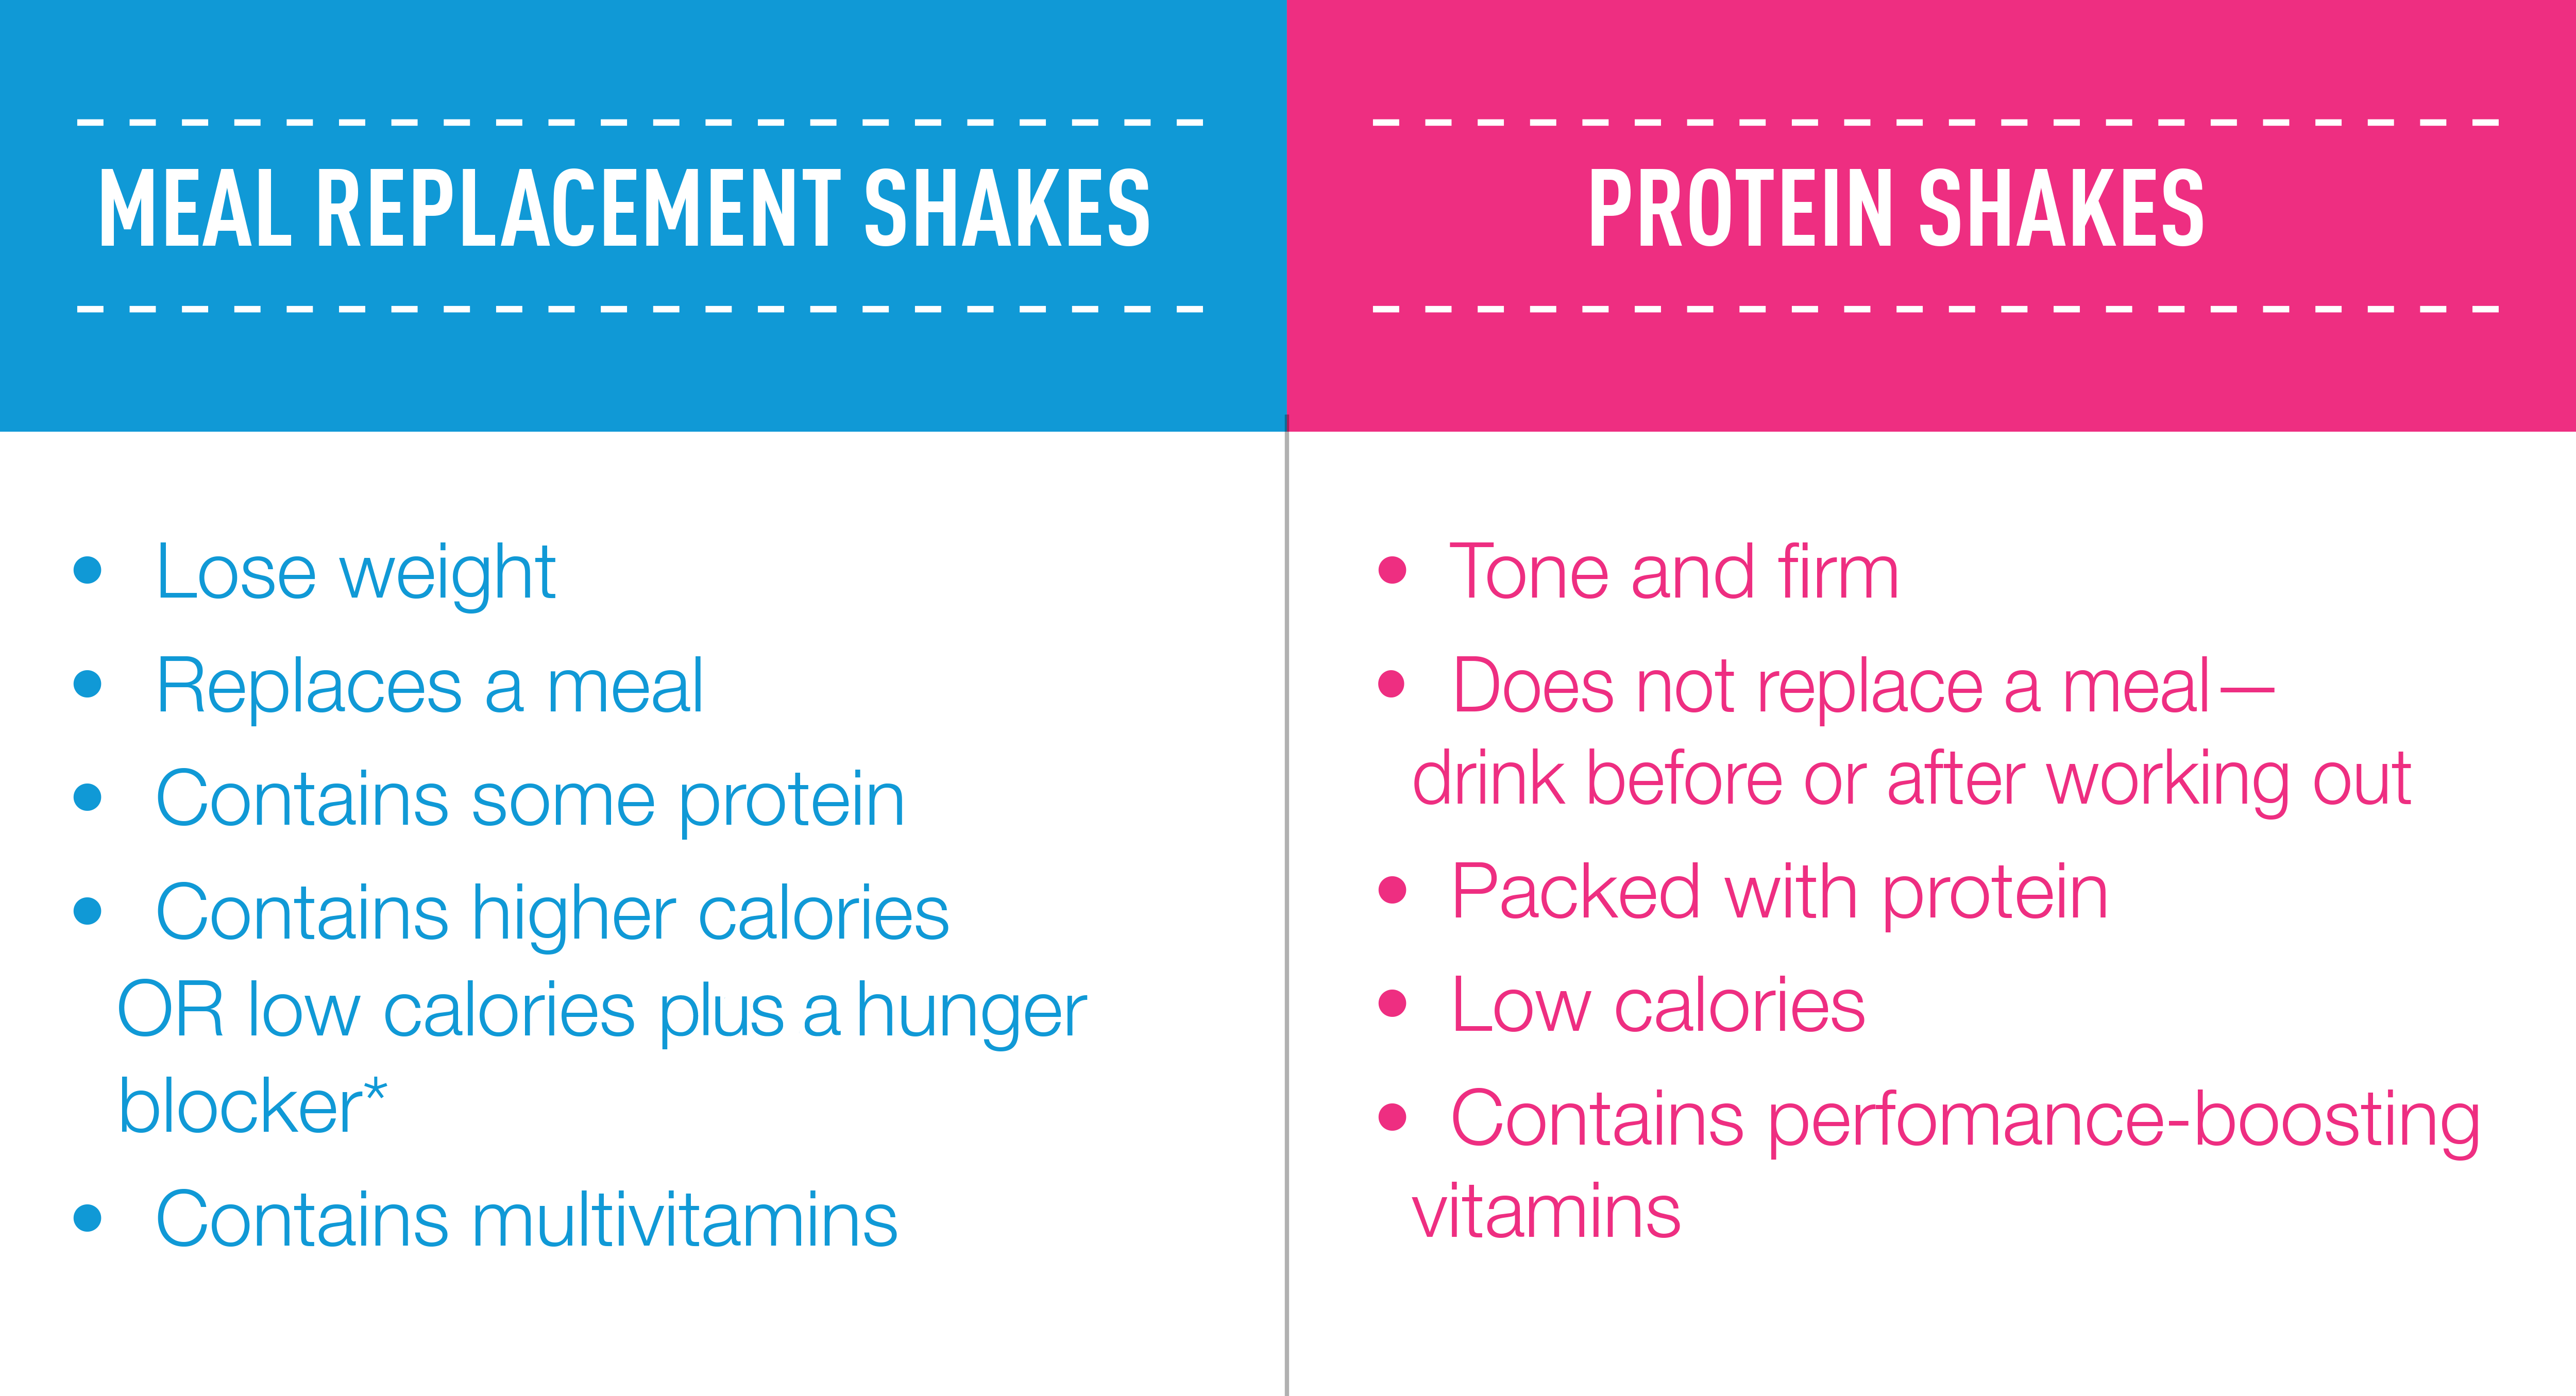 Can replacing a meal with a protein shake aid weight loss?